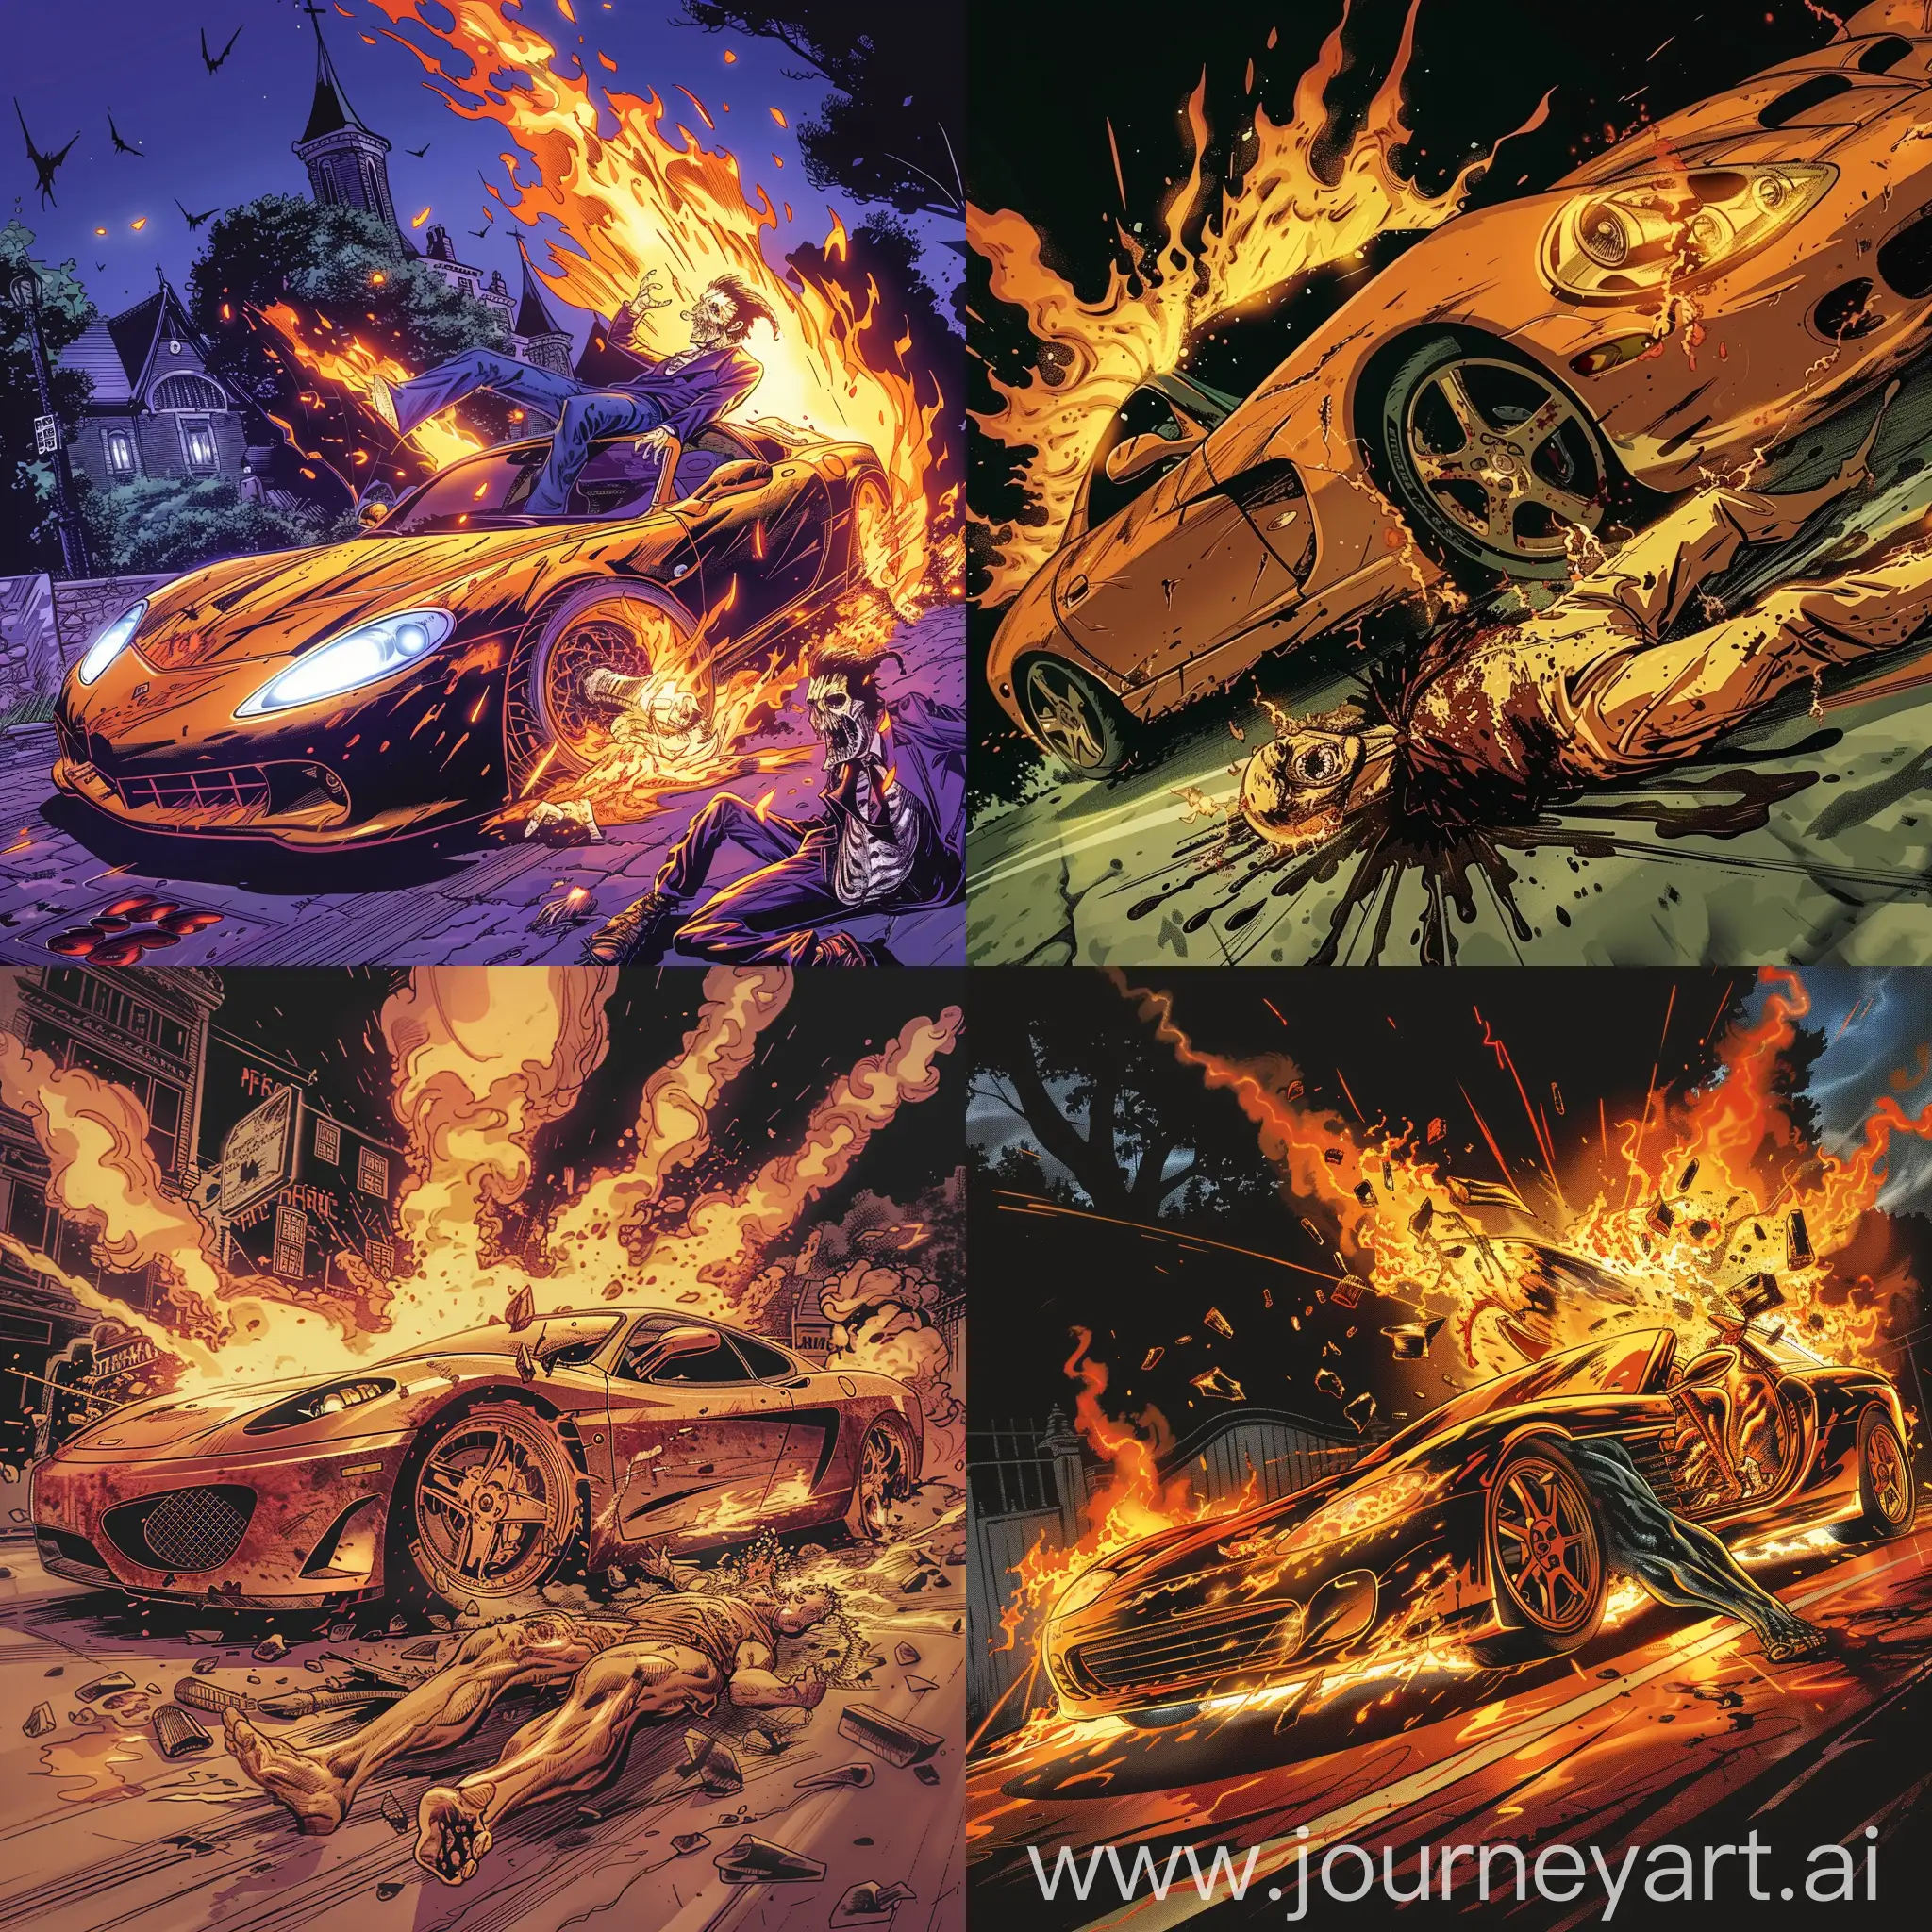 A flaming sports car cutting a vampire in half, so you can see the legs and torso and head still, in the style of the preacher comics